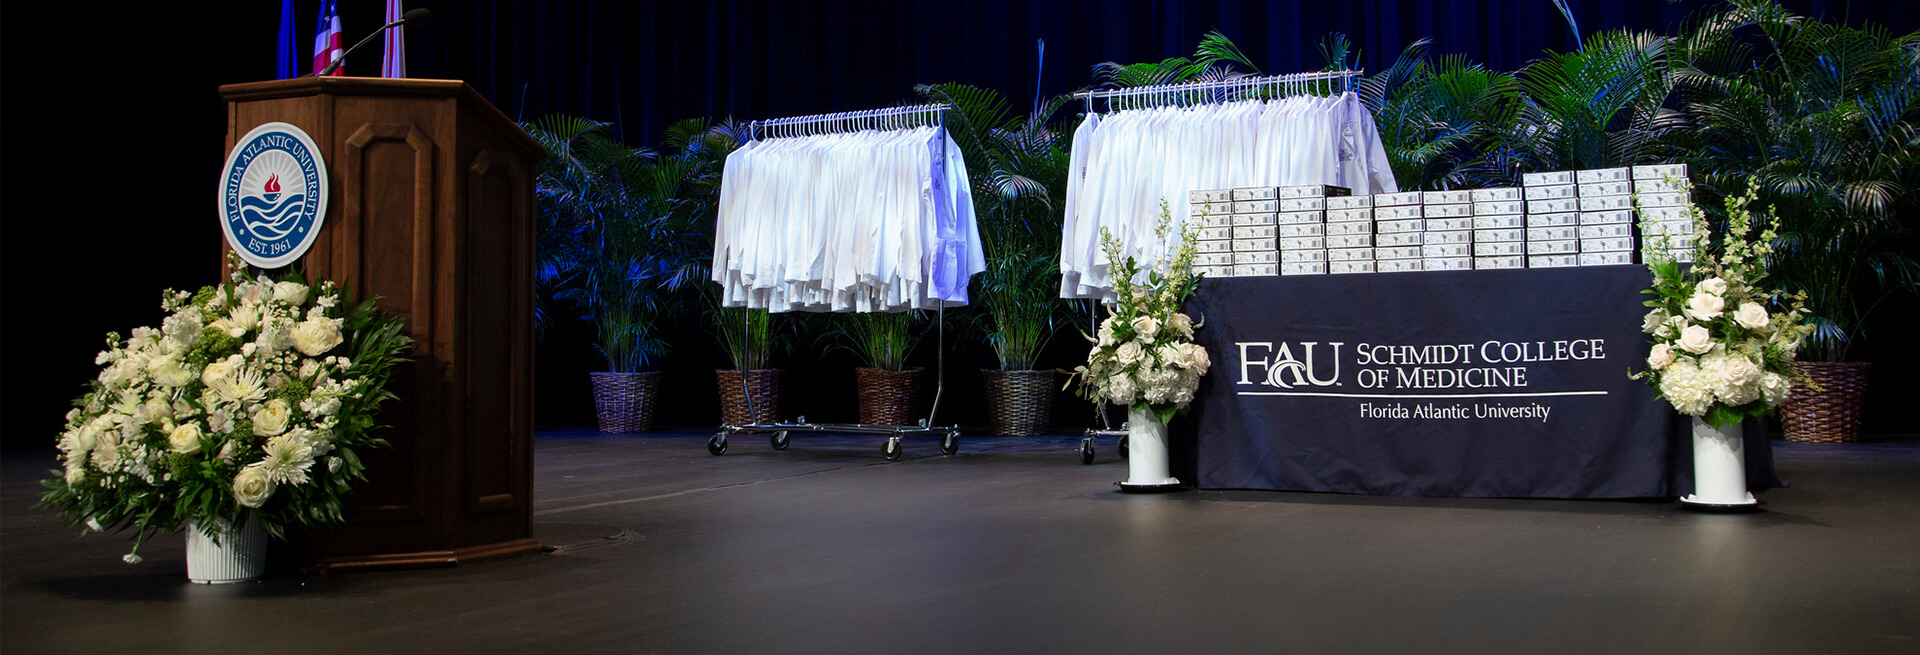 White coats displayed on stage with podium